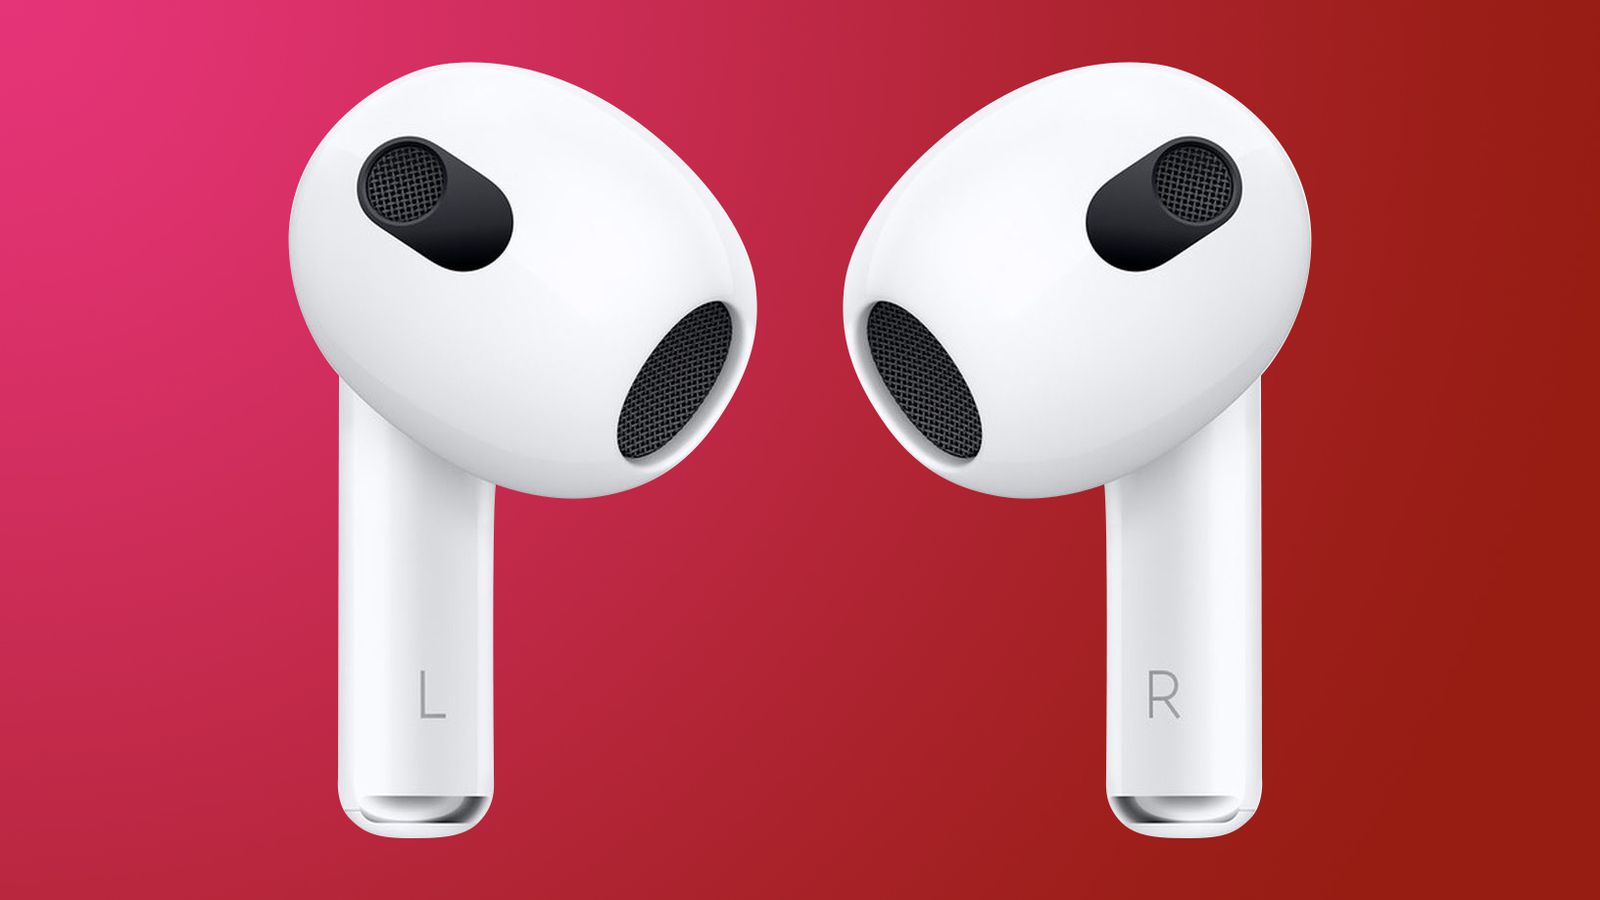 AirPods Hurt Your Ears? Here Are Some Fit Tips and Alternative